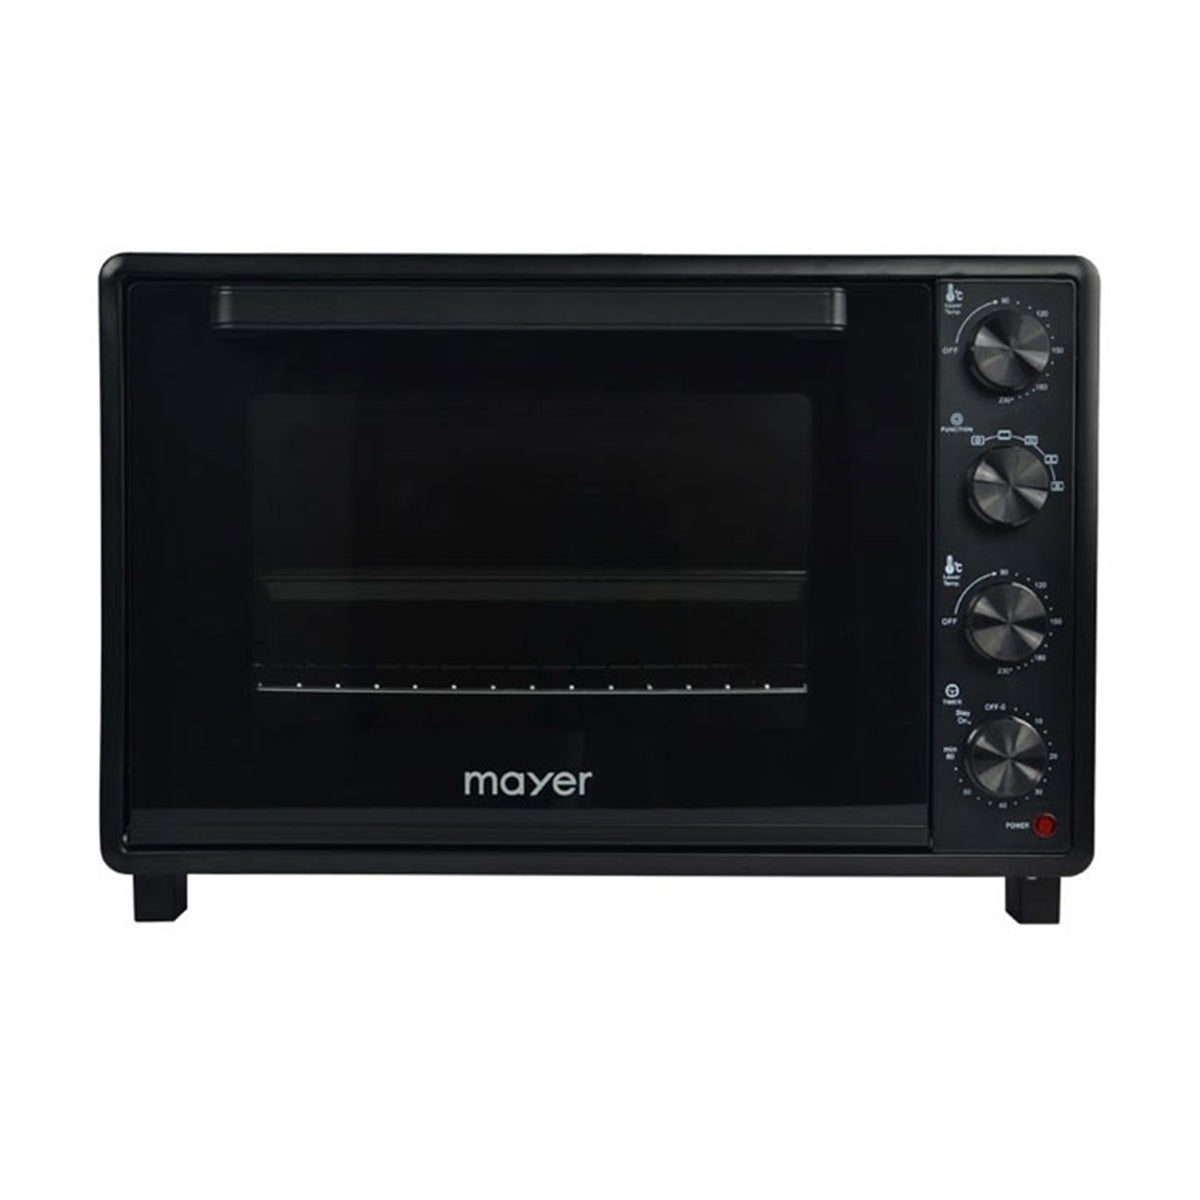 Mayer Electric Oven 33L